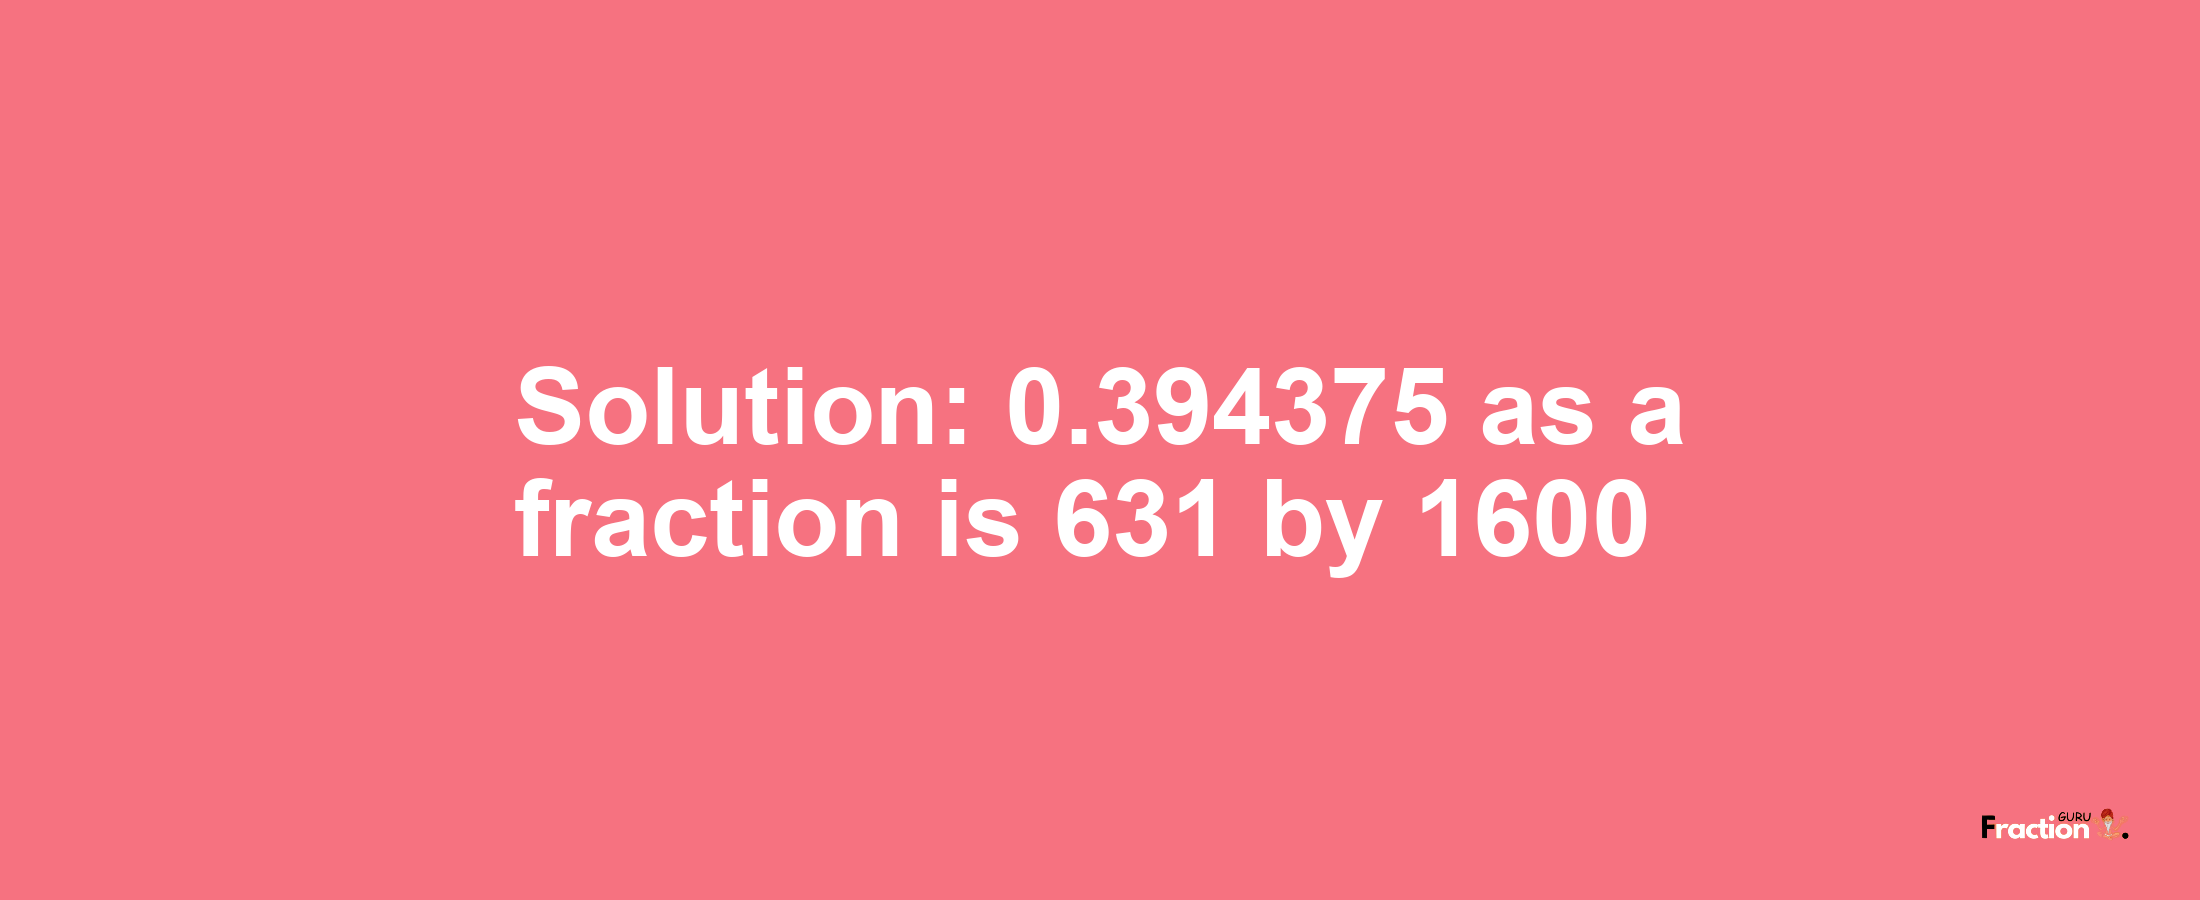 Solution:0.394375 as a fraction is 631/1600